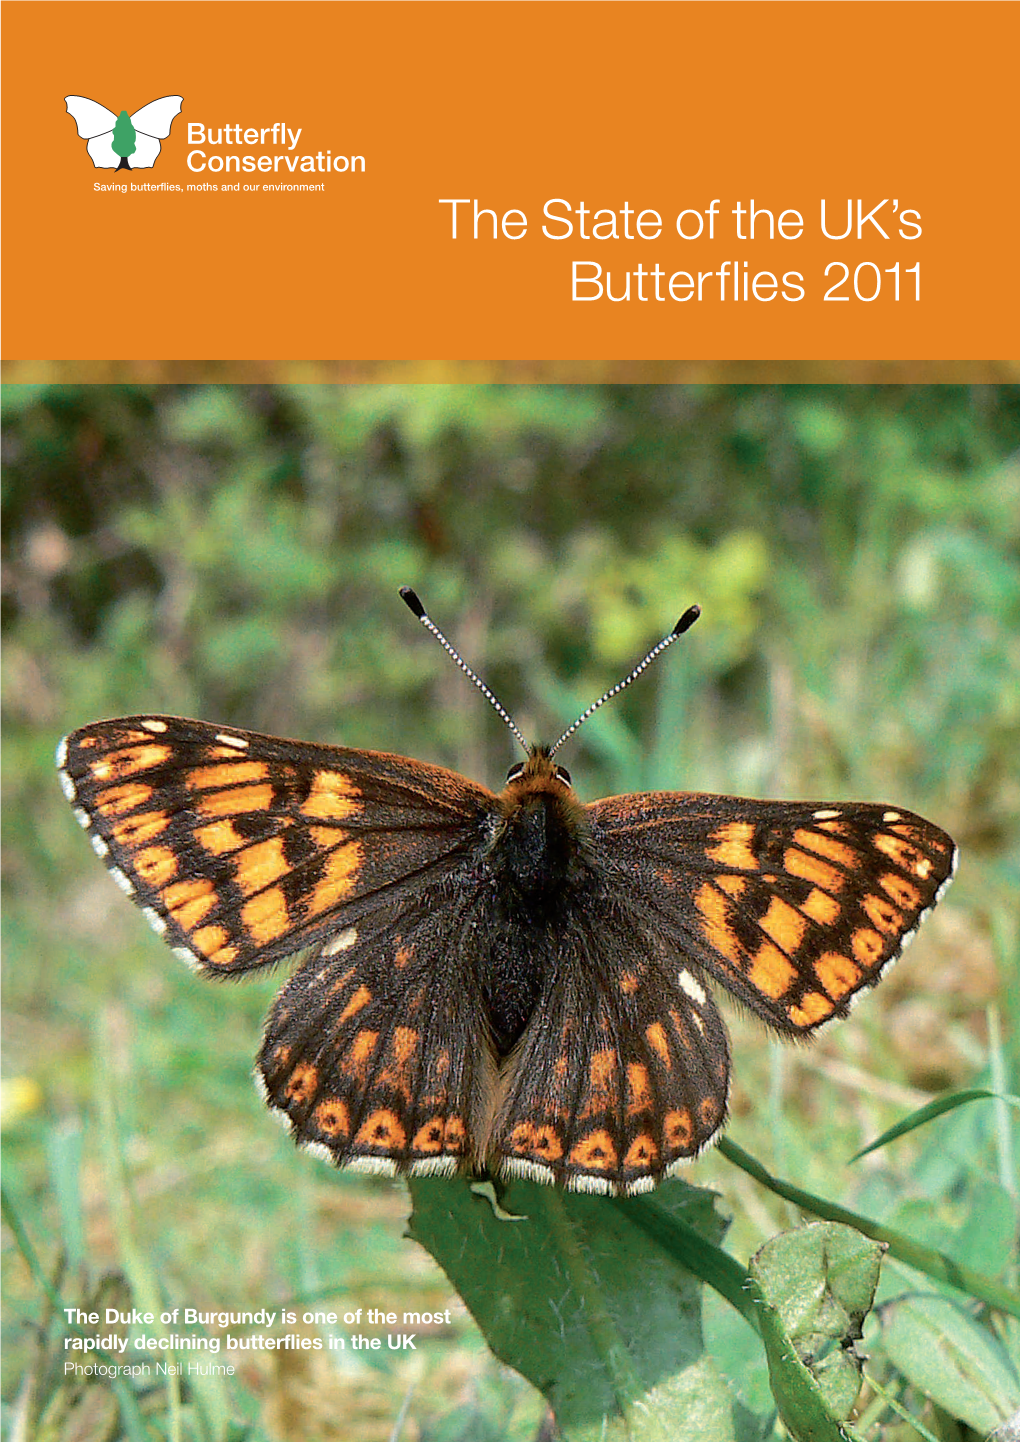 The State of the UK's Butterflies 2011